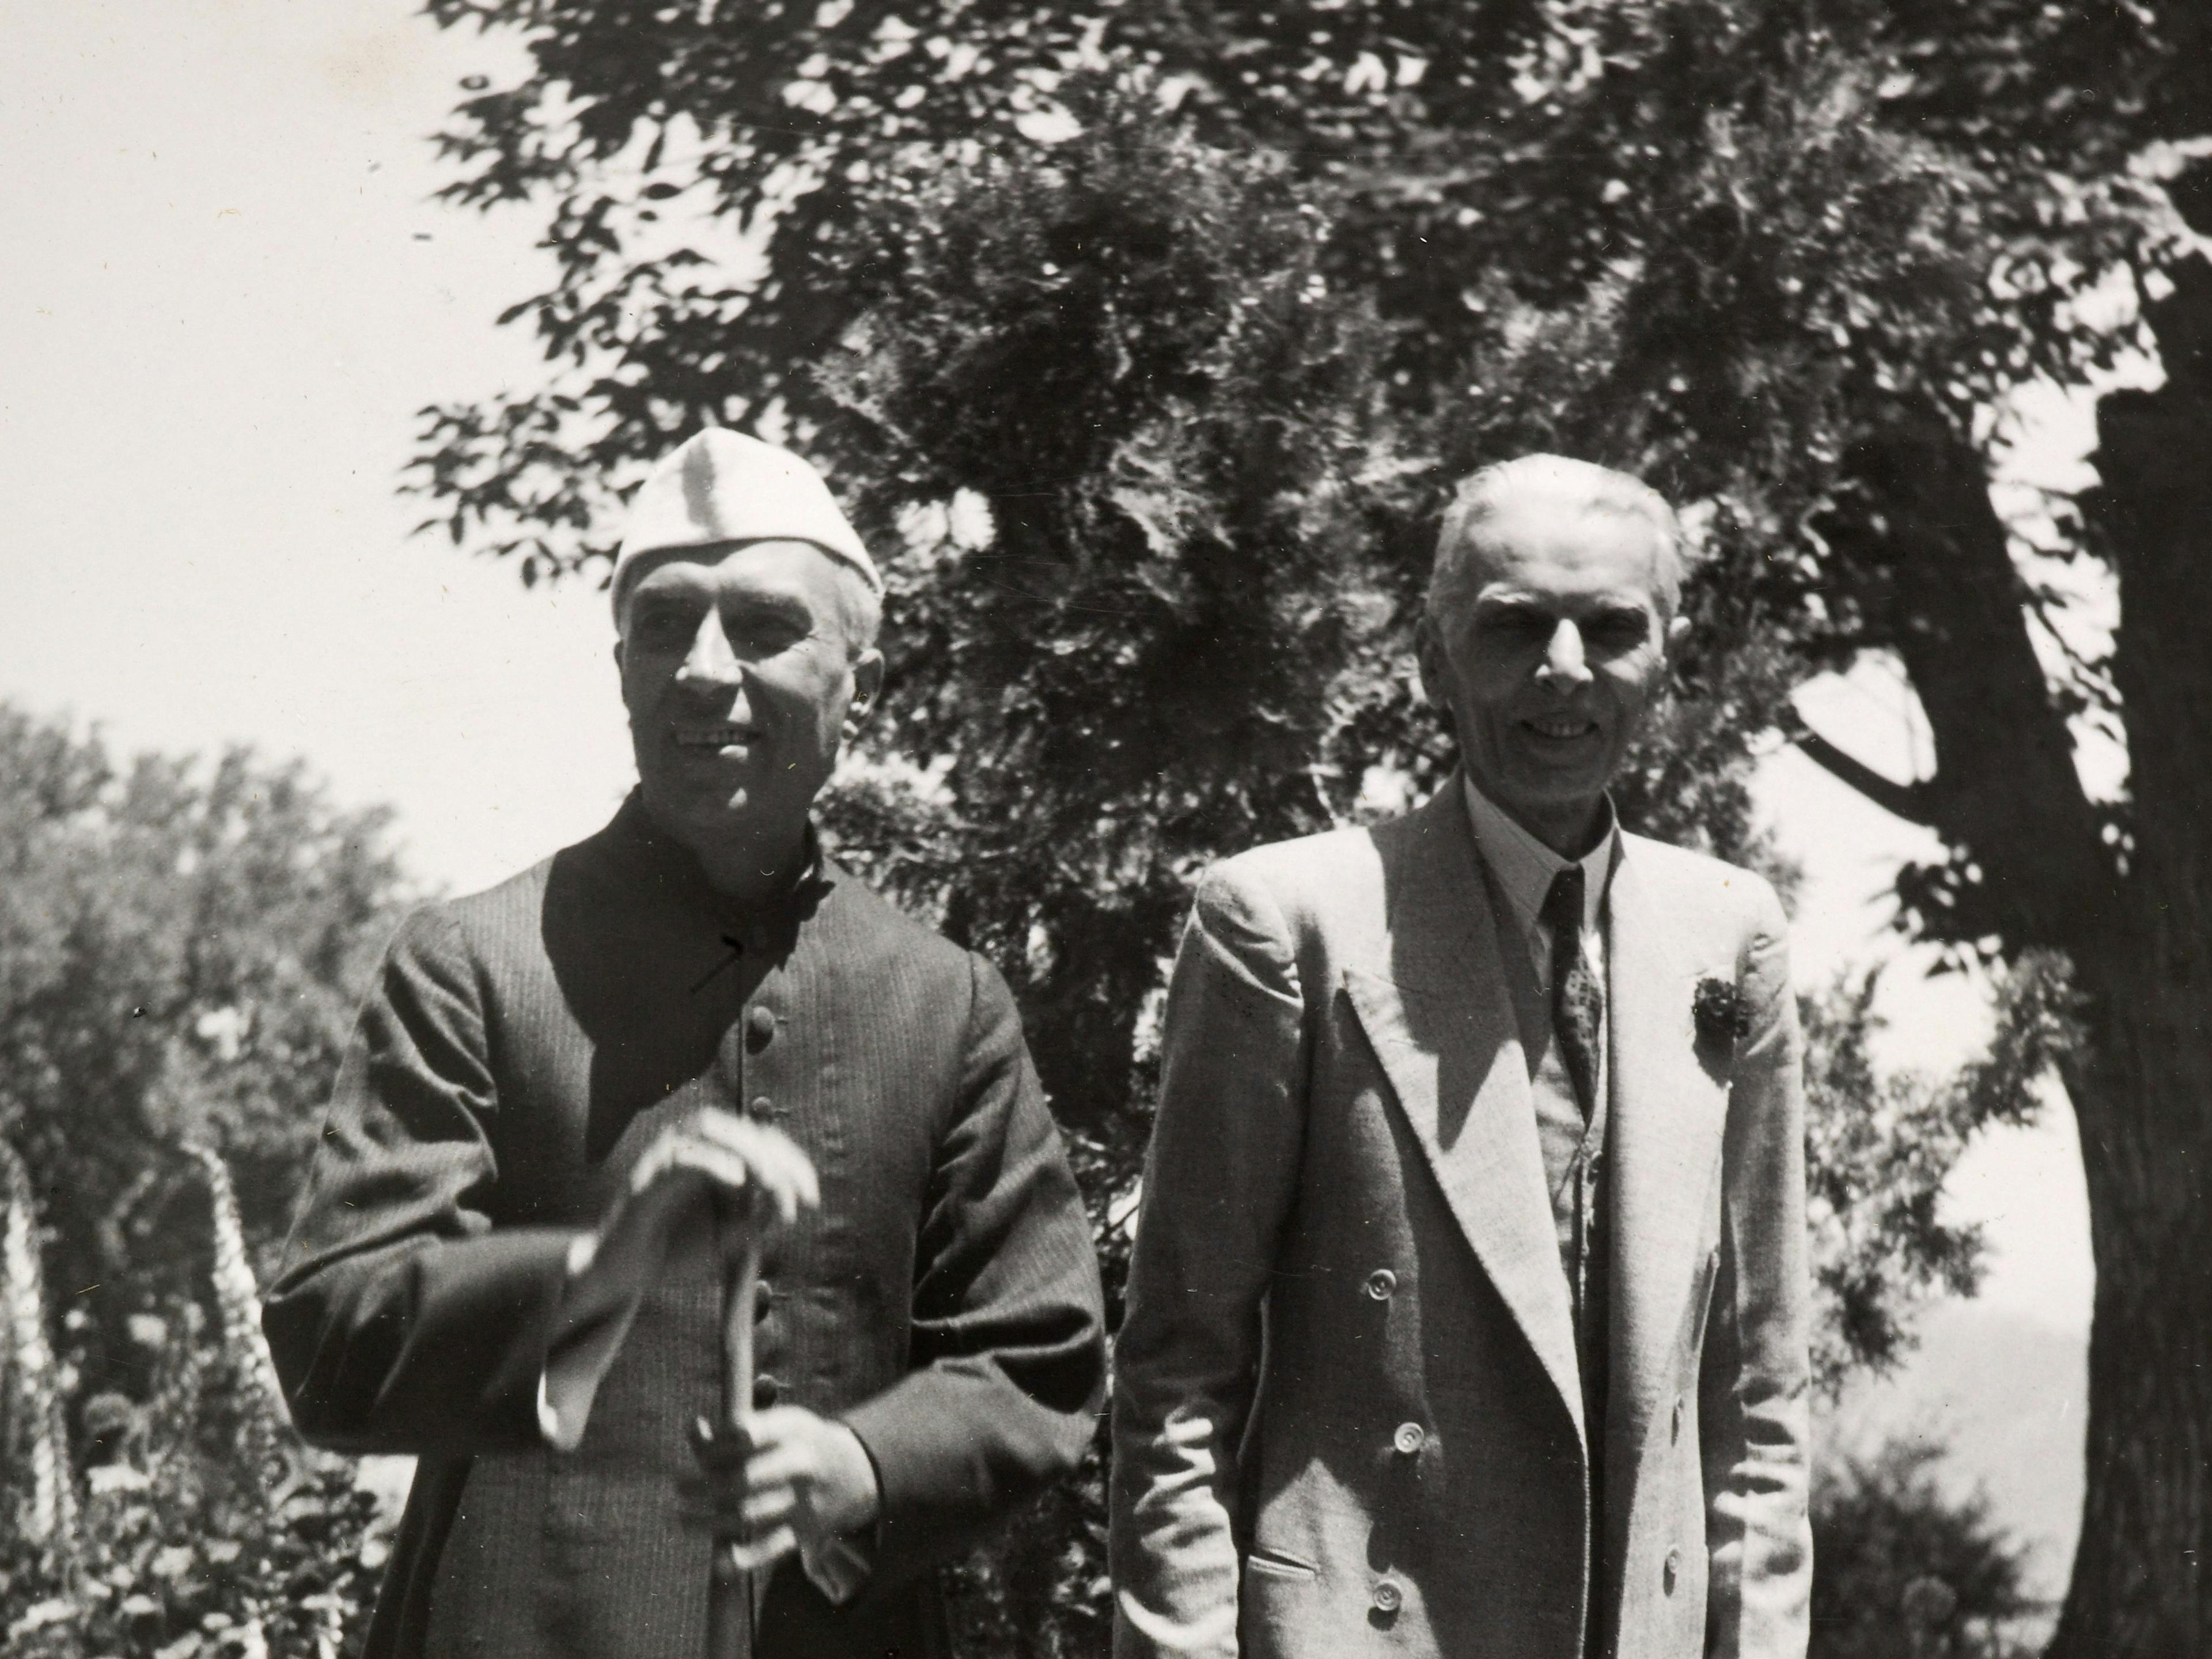 "Pandit Jawahar Lal Nehru & Mr M.A. Jinnah [walking together in the grounds of Viceregal Lodge, Simla.]" (1946, British Library)